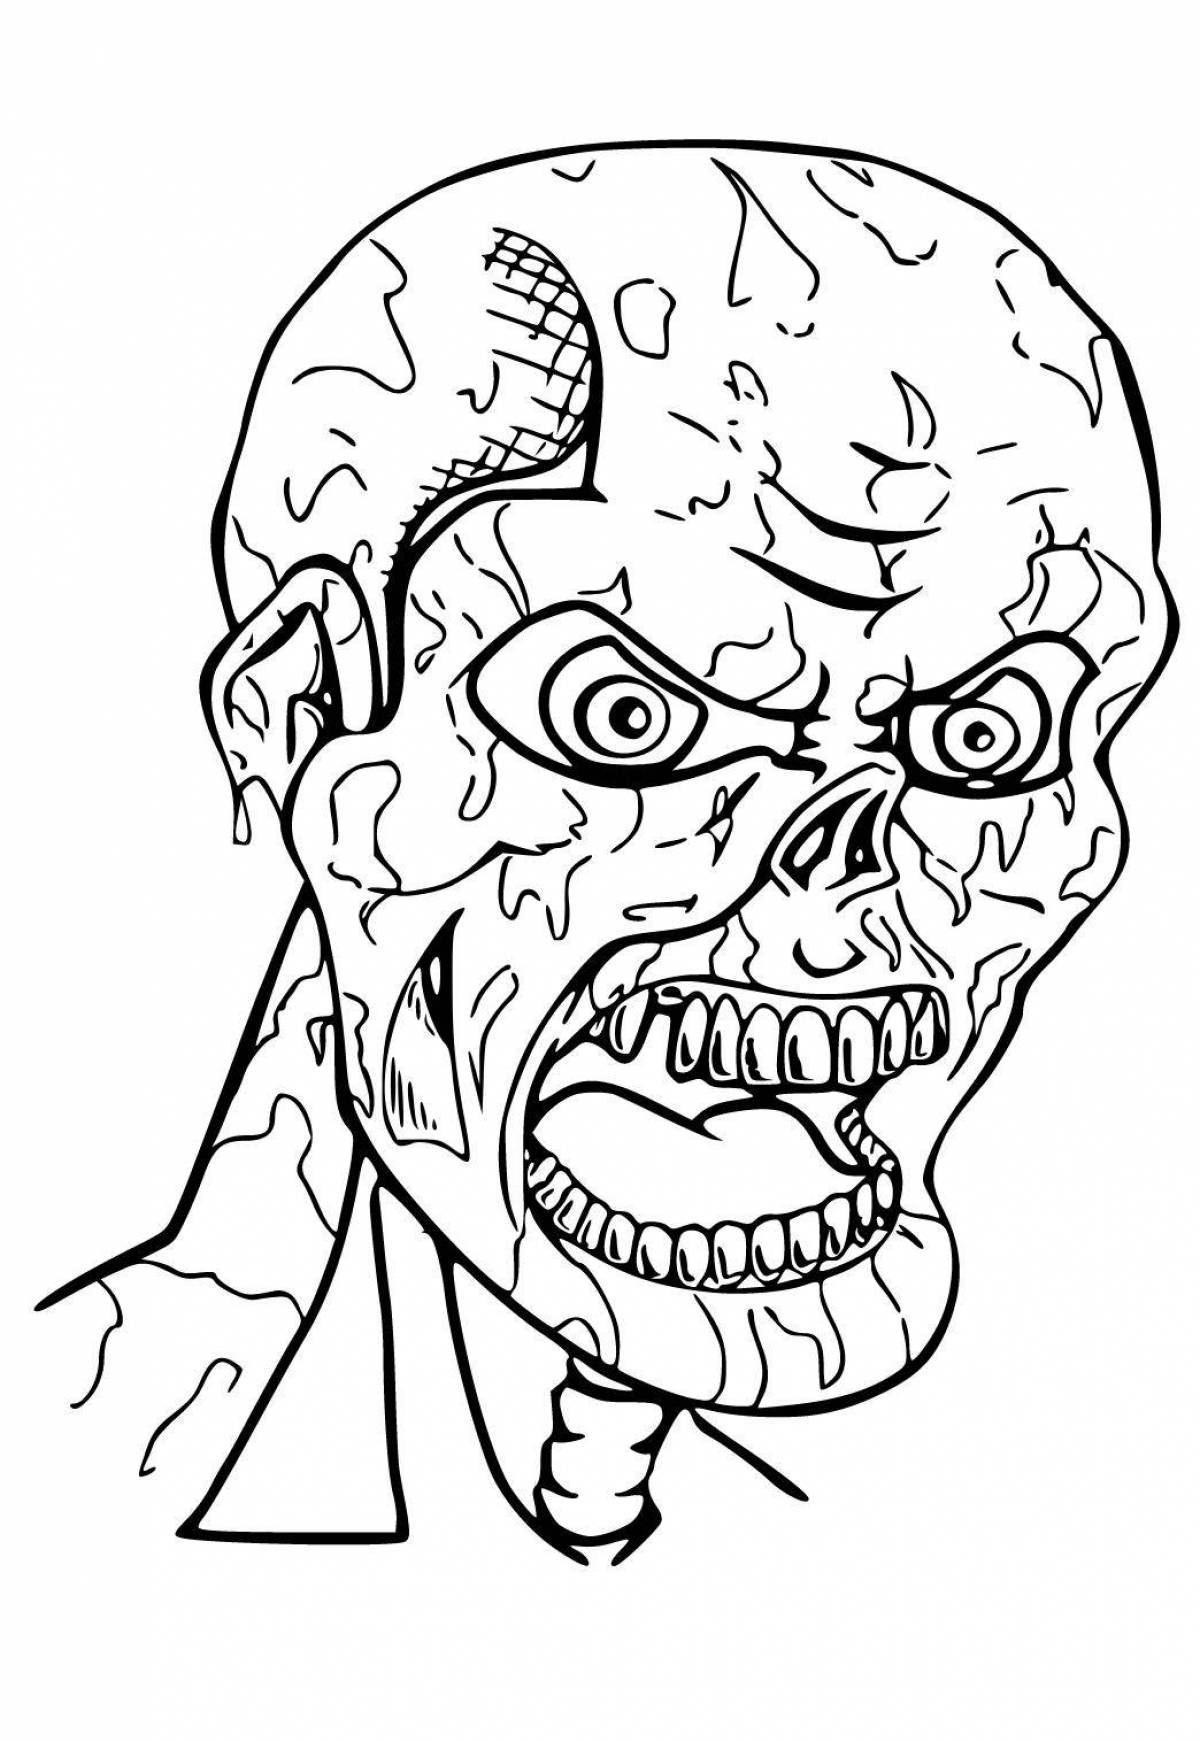 Coloring page unappetizing mutant zombie